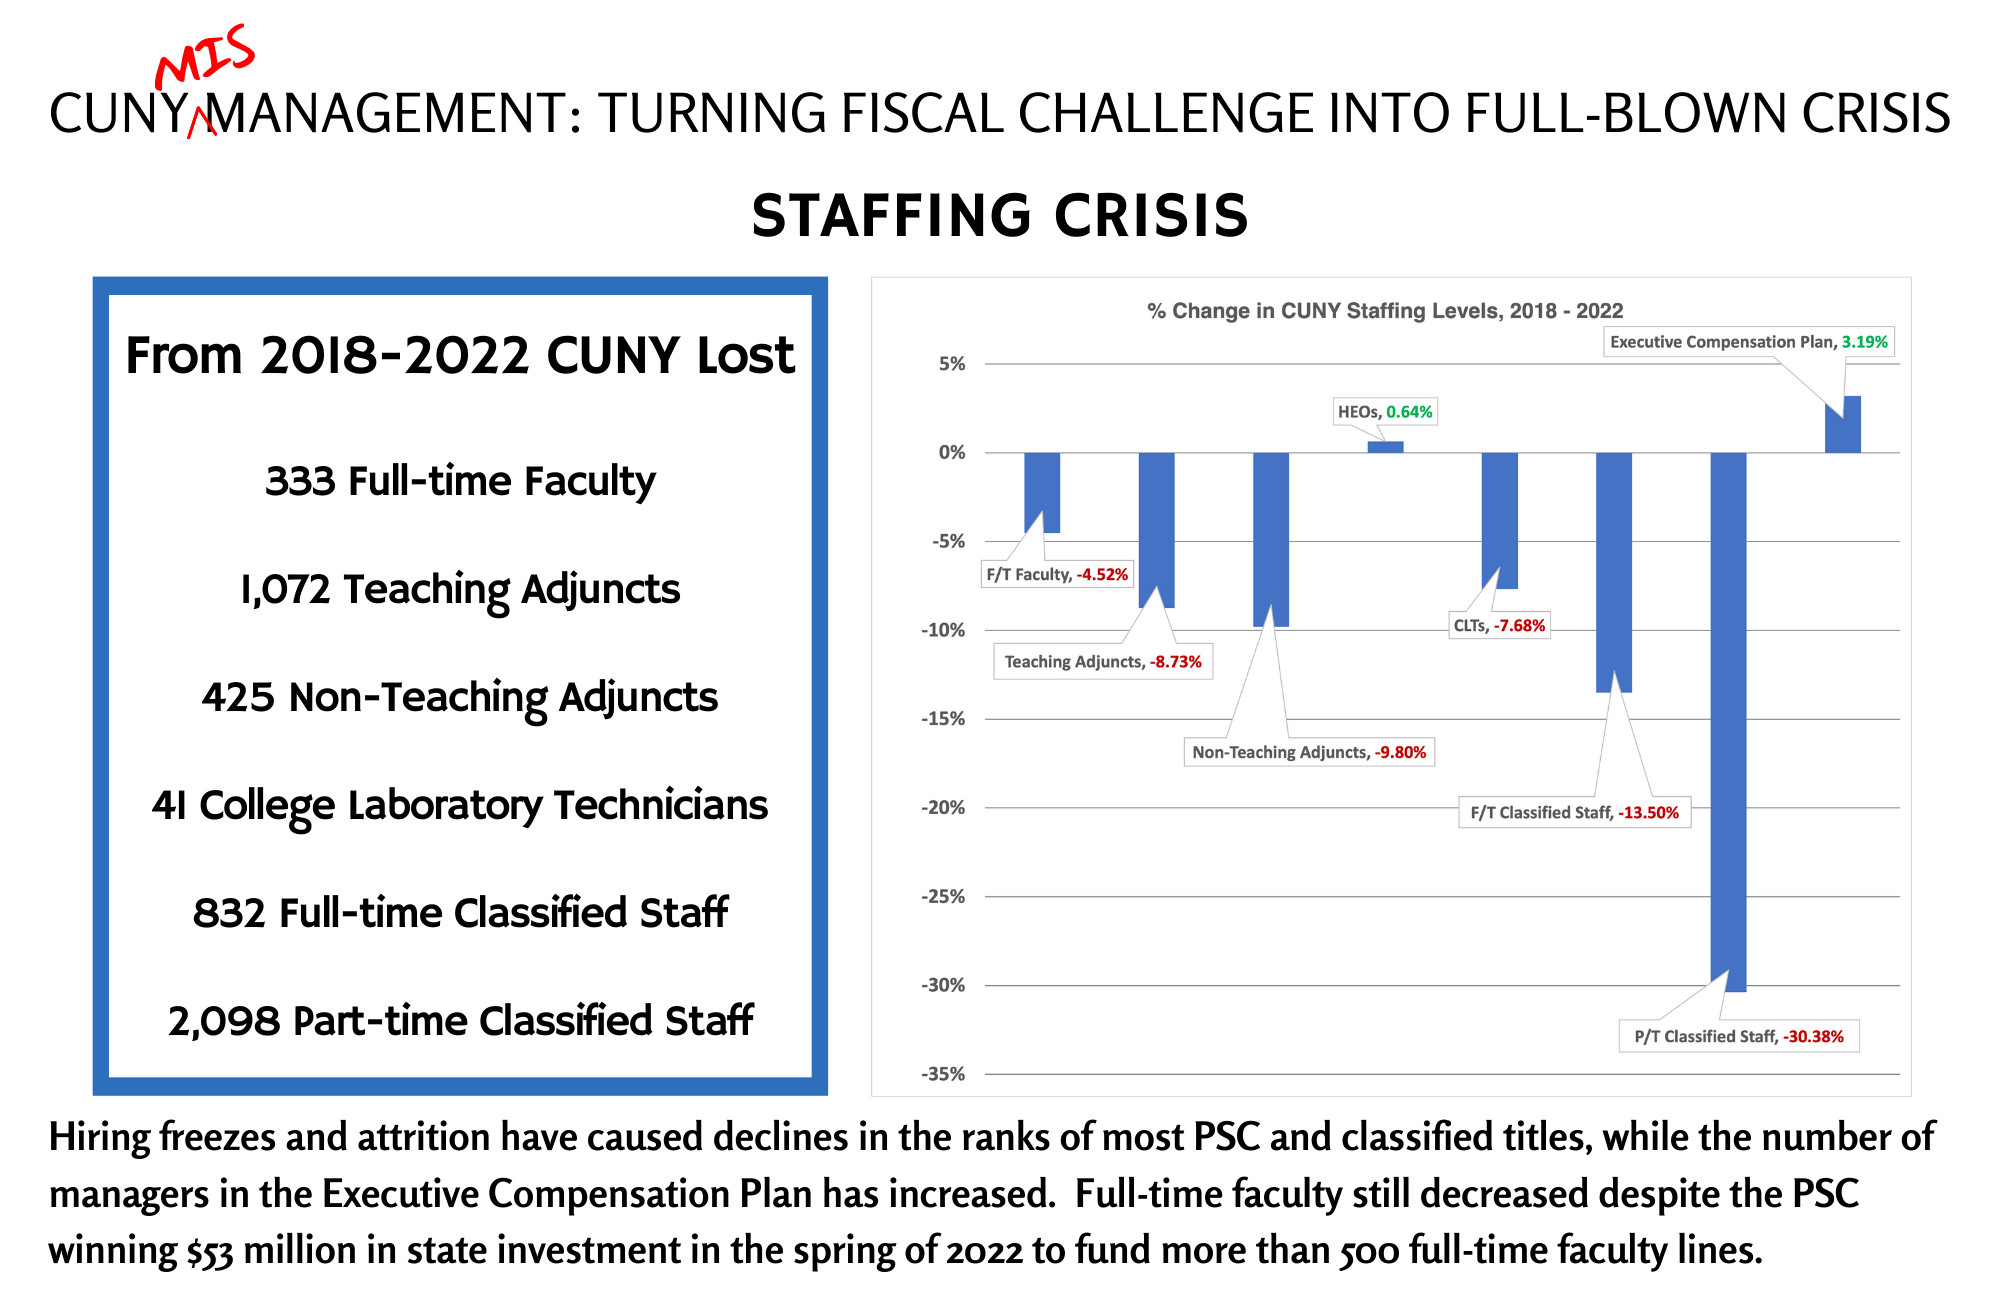 Hiring freezes and attrition have caused declines in the ranks of most PSC and classified titles, while the number of managers in the Executive Compensation Plan has increased. Full-time faculty still decreased despite the PSC winning $53 million in state investment in the spring of 2022 to fund more than 500 full-time faculty lines.